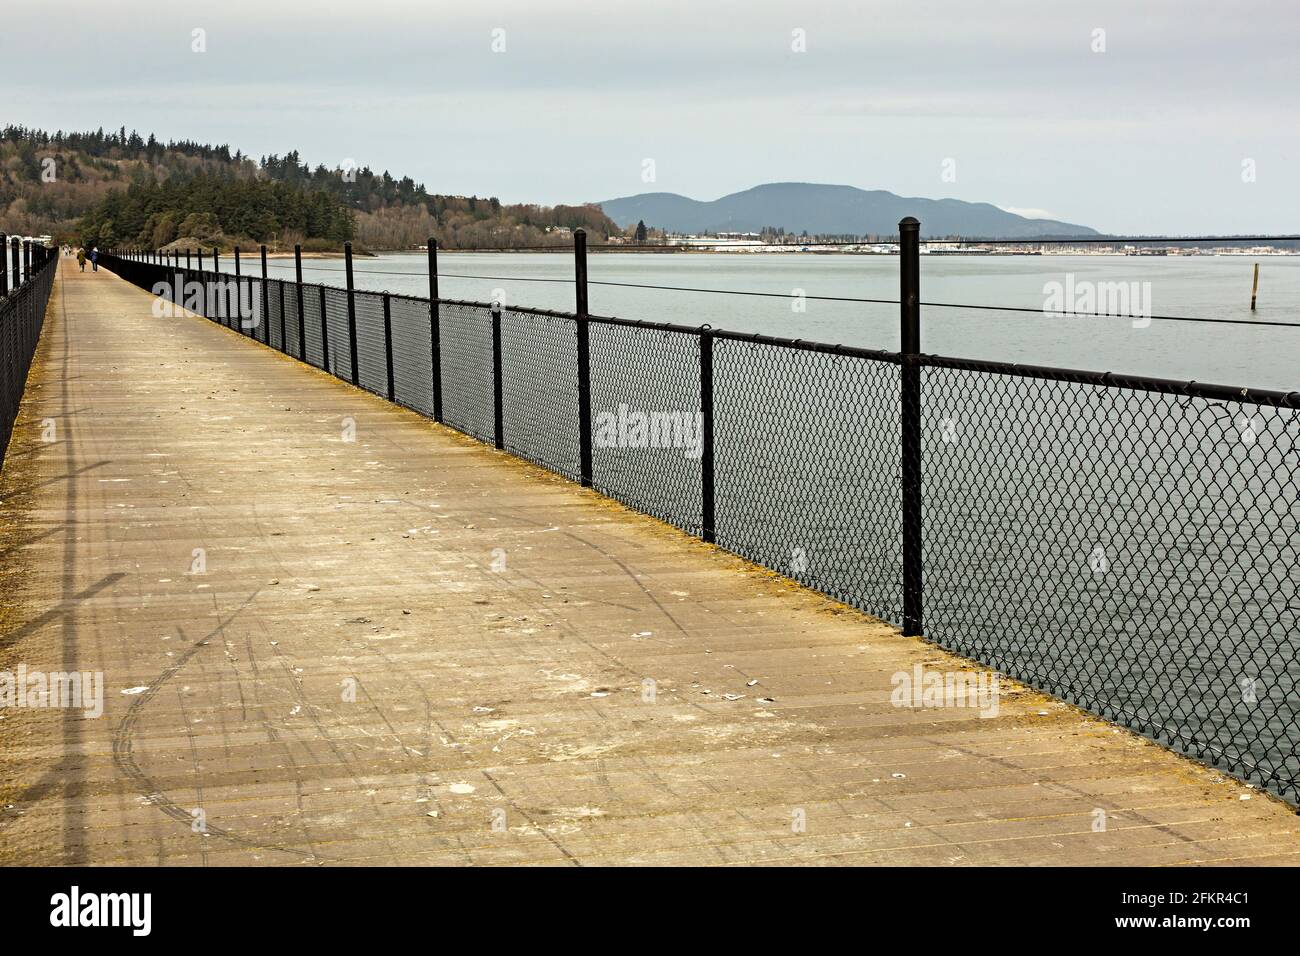 WA19569-00...WASHINGTON - The trestle crossing Fidalgo Bay on the Tommy Thompson Trail with the marina and downtown Anacortes in the background. Stock Photo